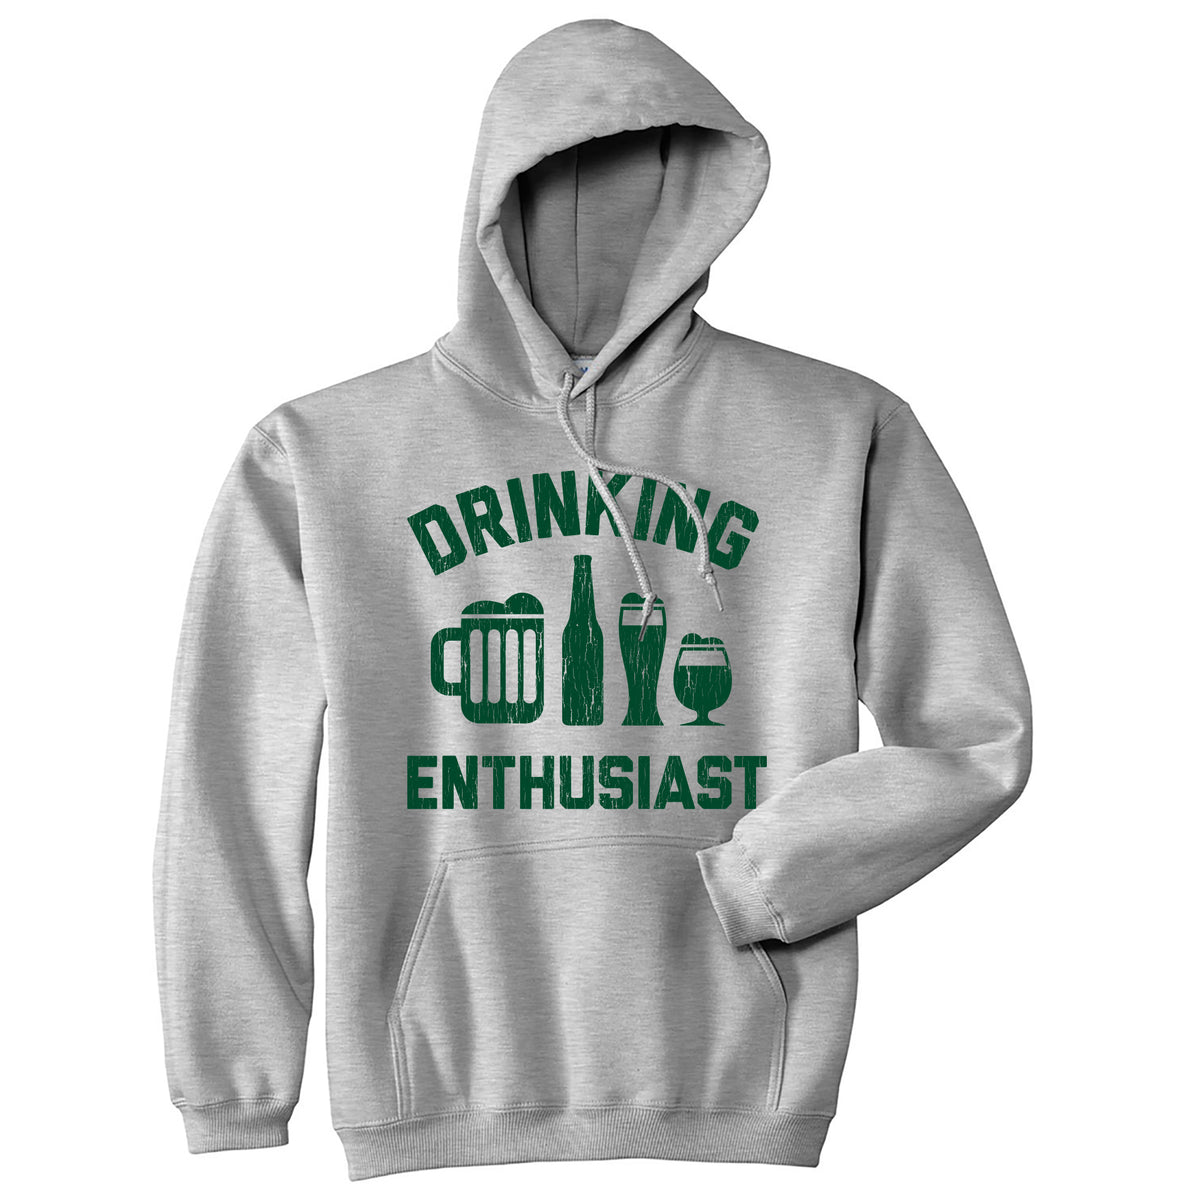 Funny Light Heather Grey - ENTHUSIAST Drinking Enthusiast Hoodie Nerdy Saint Patrick&#39;s Day Drinking Tee